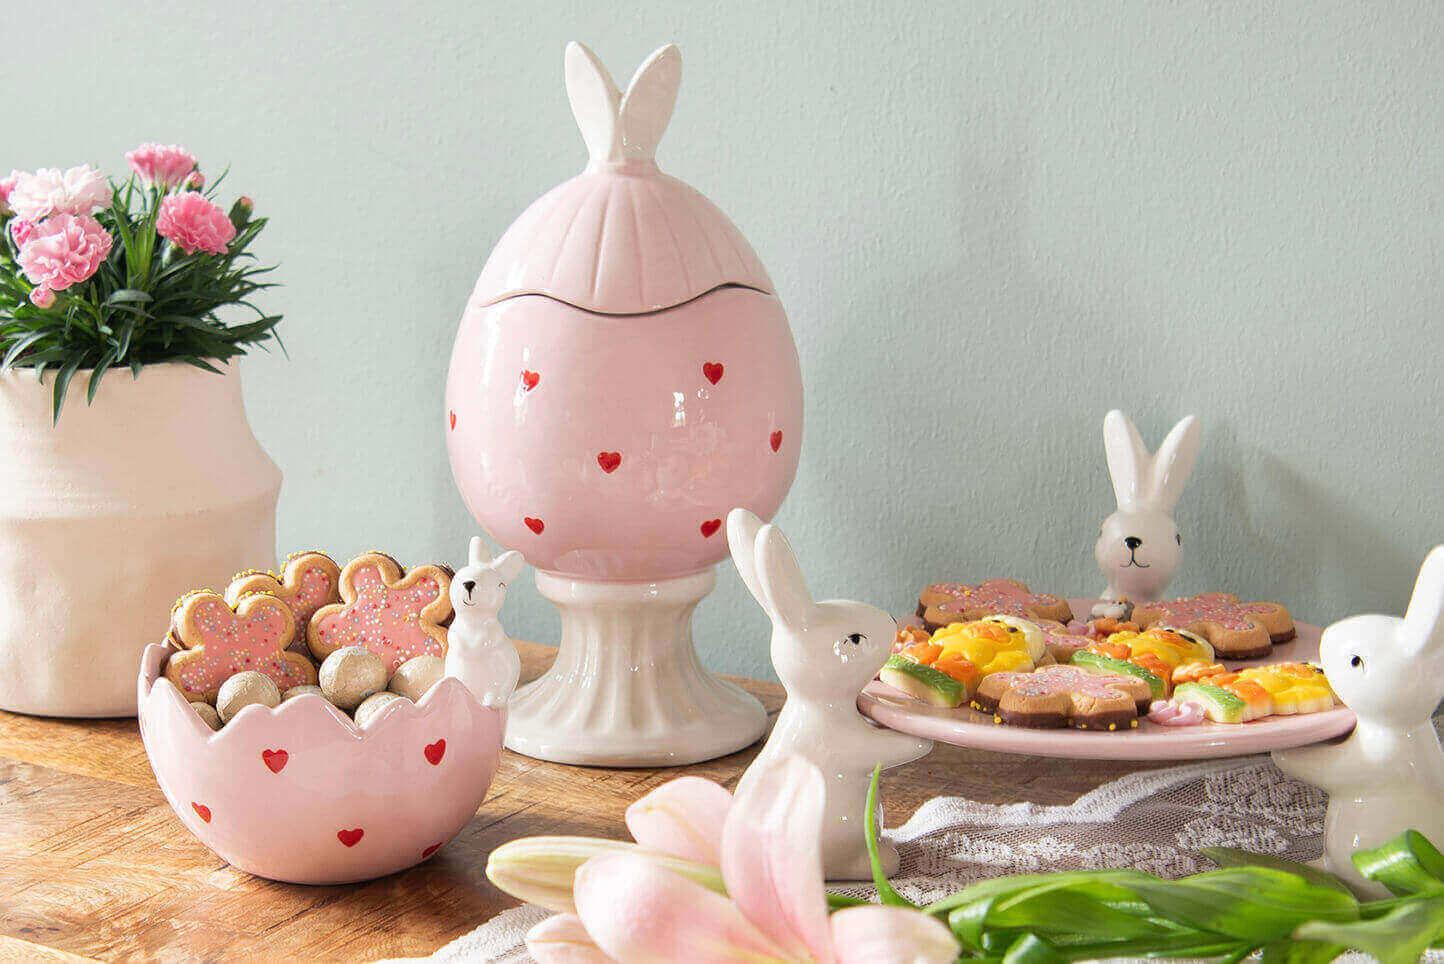 The photo depicts a charming Easter table setting. In the foreground is an adorable, pink flower-shaped bowl filled with heart-shaped cookies and small Easter eggs, with a small bunny figurine protruding from it. Next to the bowl sits a larger, elegant pink egg-shaped pot with bunny ears on the lid and adorned with small hearts. Beside it stands a vase filled with lush pink flowers, adding freshness and color to the scene. On the right side of the photo, you can see a pink plate filled with colorful canapés, surrounded by porcelain bunnies presenting the plate. The entire setting is placed on a wooden table and is enlivened by some spring flowers in the foreground, emphasizing the spring and Easter mood. The pastel colors and bunny theme offer a delightful and festive atmosphere characteristic of Easter.